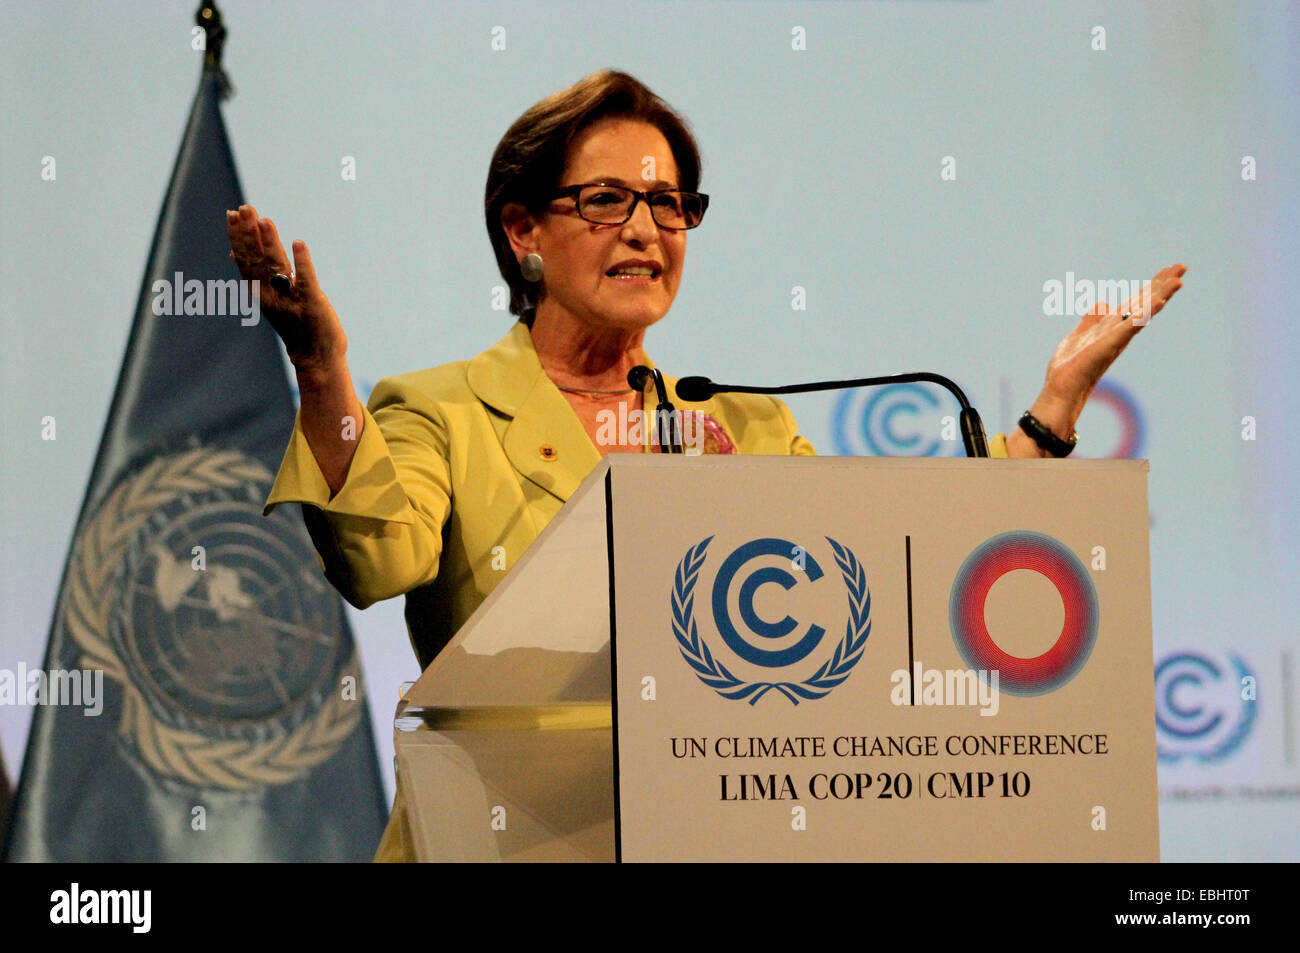 Lima, Peru. 1st Dec, 2014. Lima's Mayor Susana Villaran delivers a speech during the opening ceremony of the 20th Conference of the United Nations on Climate Change (COP20), in Lima, Peru, on Dec. 1, 2014. © Luis Camacho/Xinhua/Alamy Live News Stock Photo